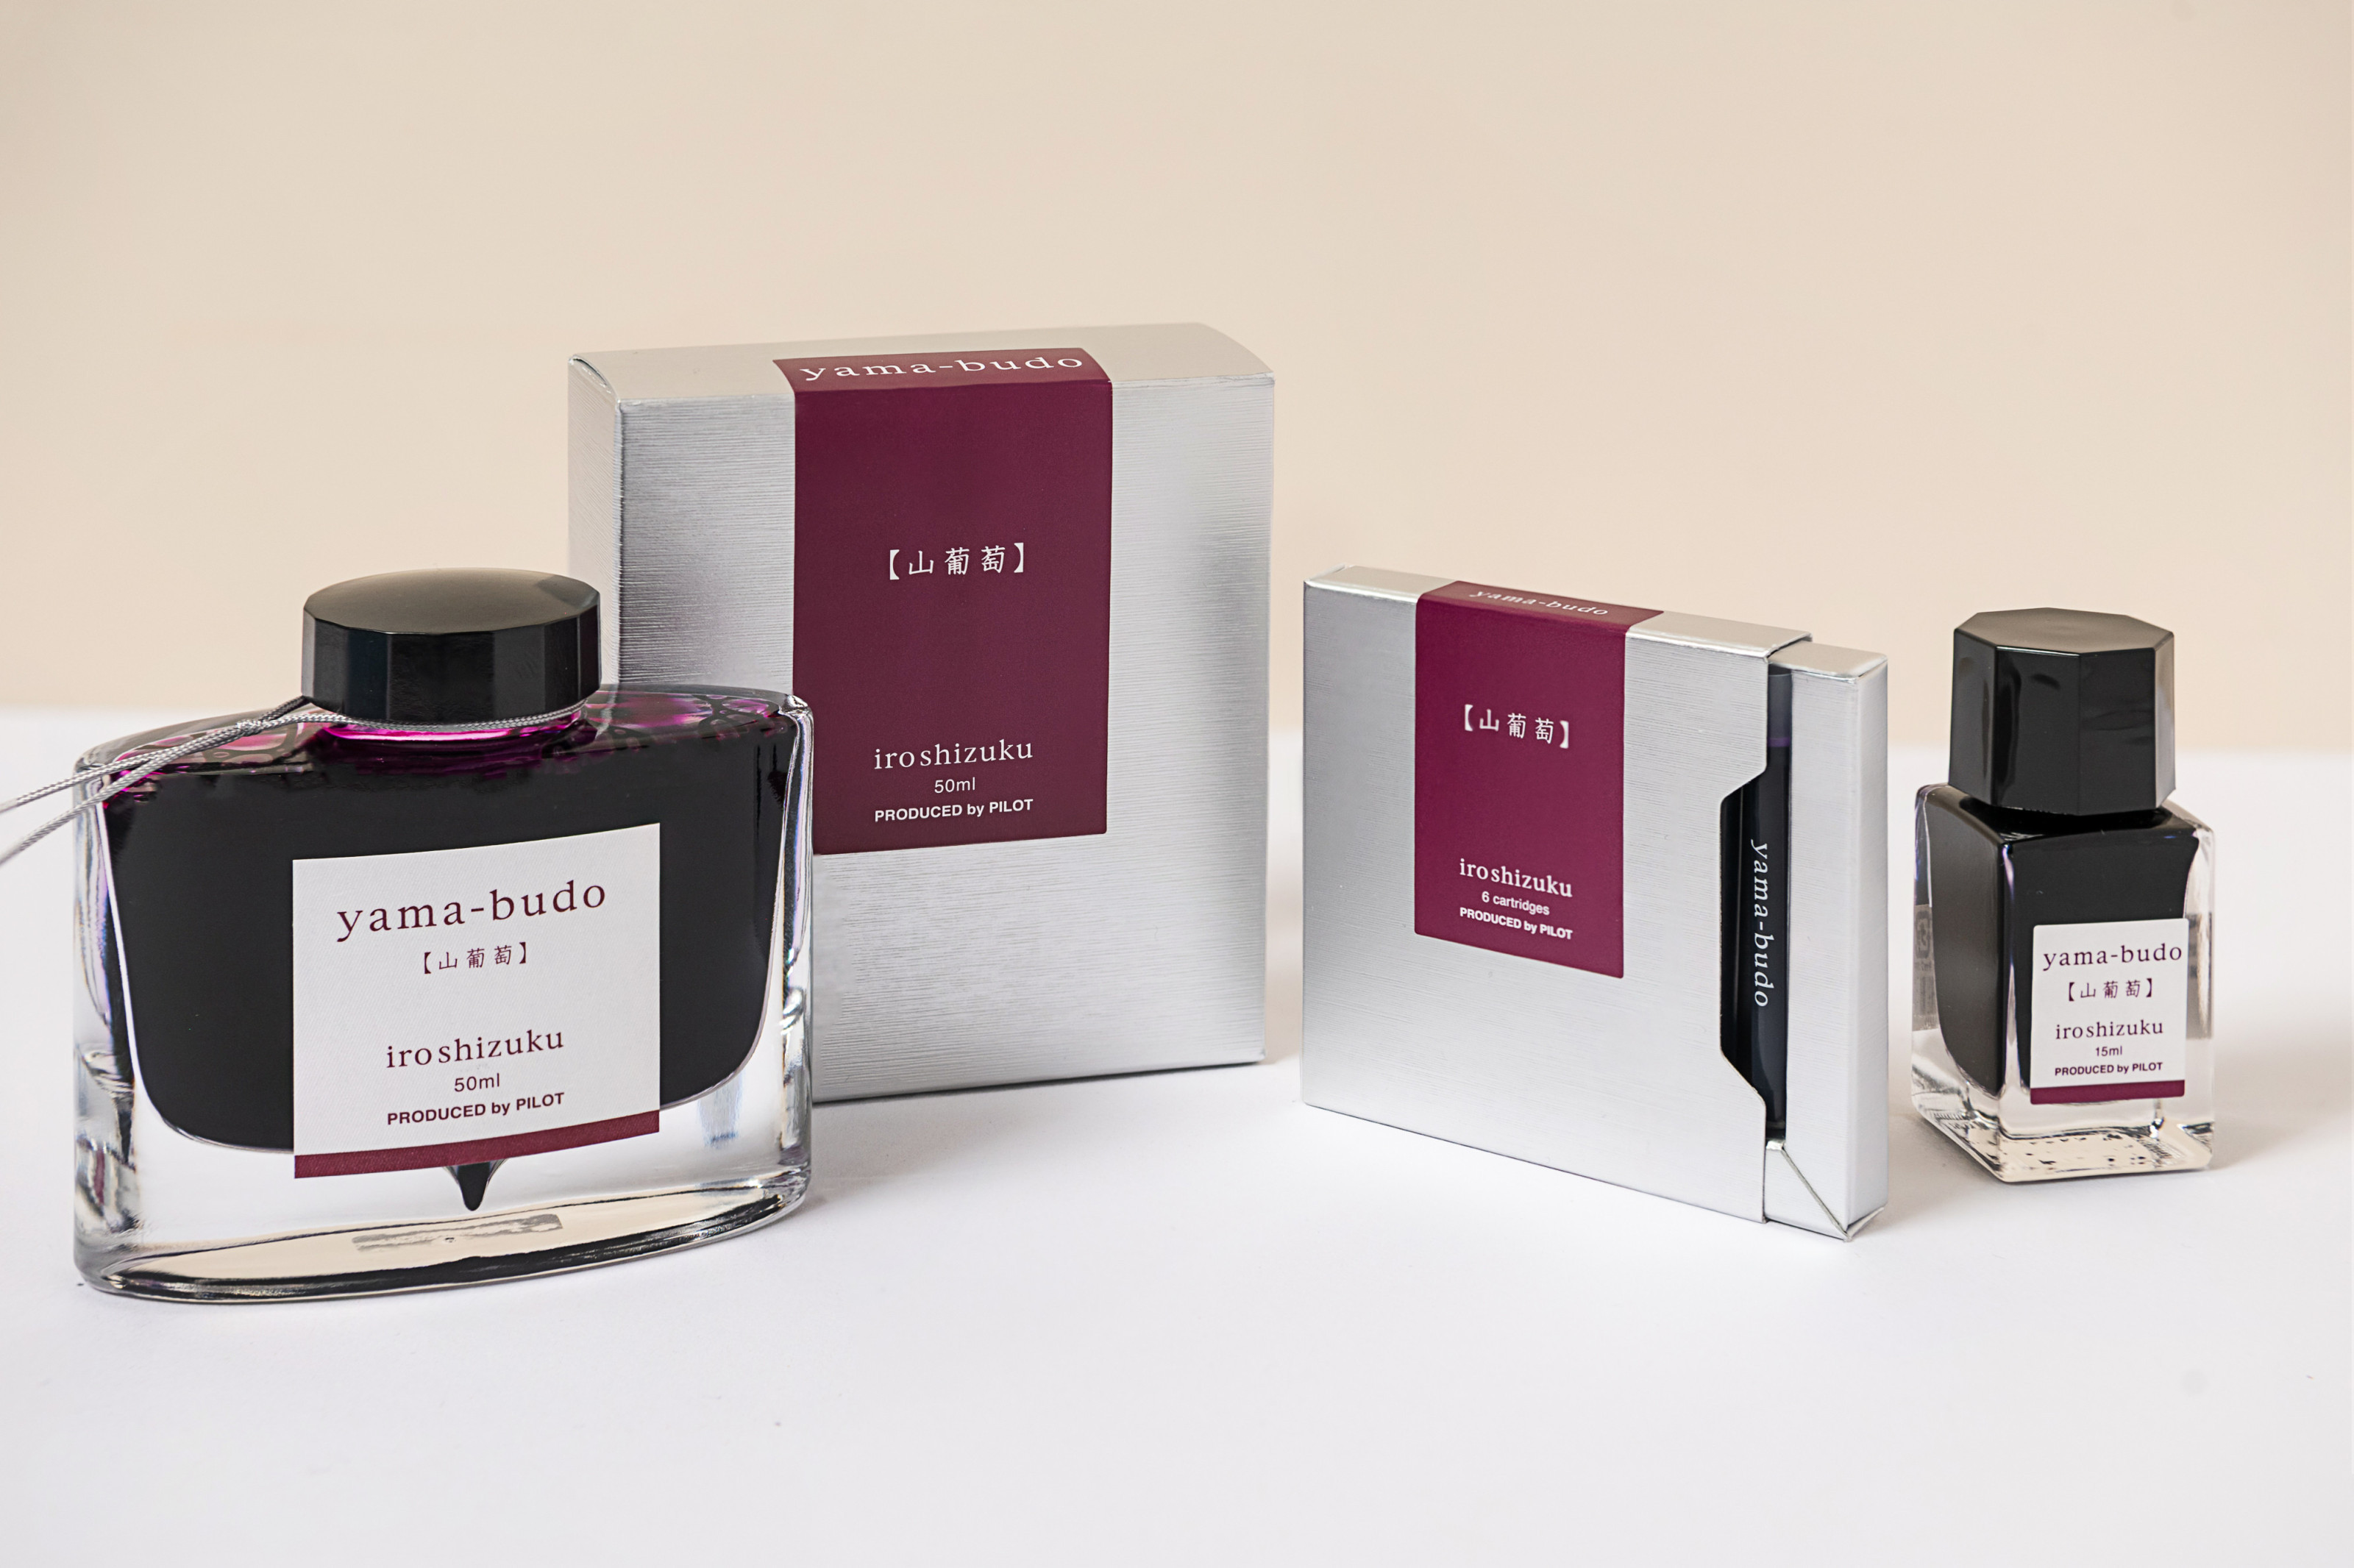 The iroshizuku Fountain Pen Ink Bottle in 50ml, 15ml and Ink Cartridges in the shade yama-budo, showcasing the elegant presentation and packaging of the ink. 